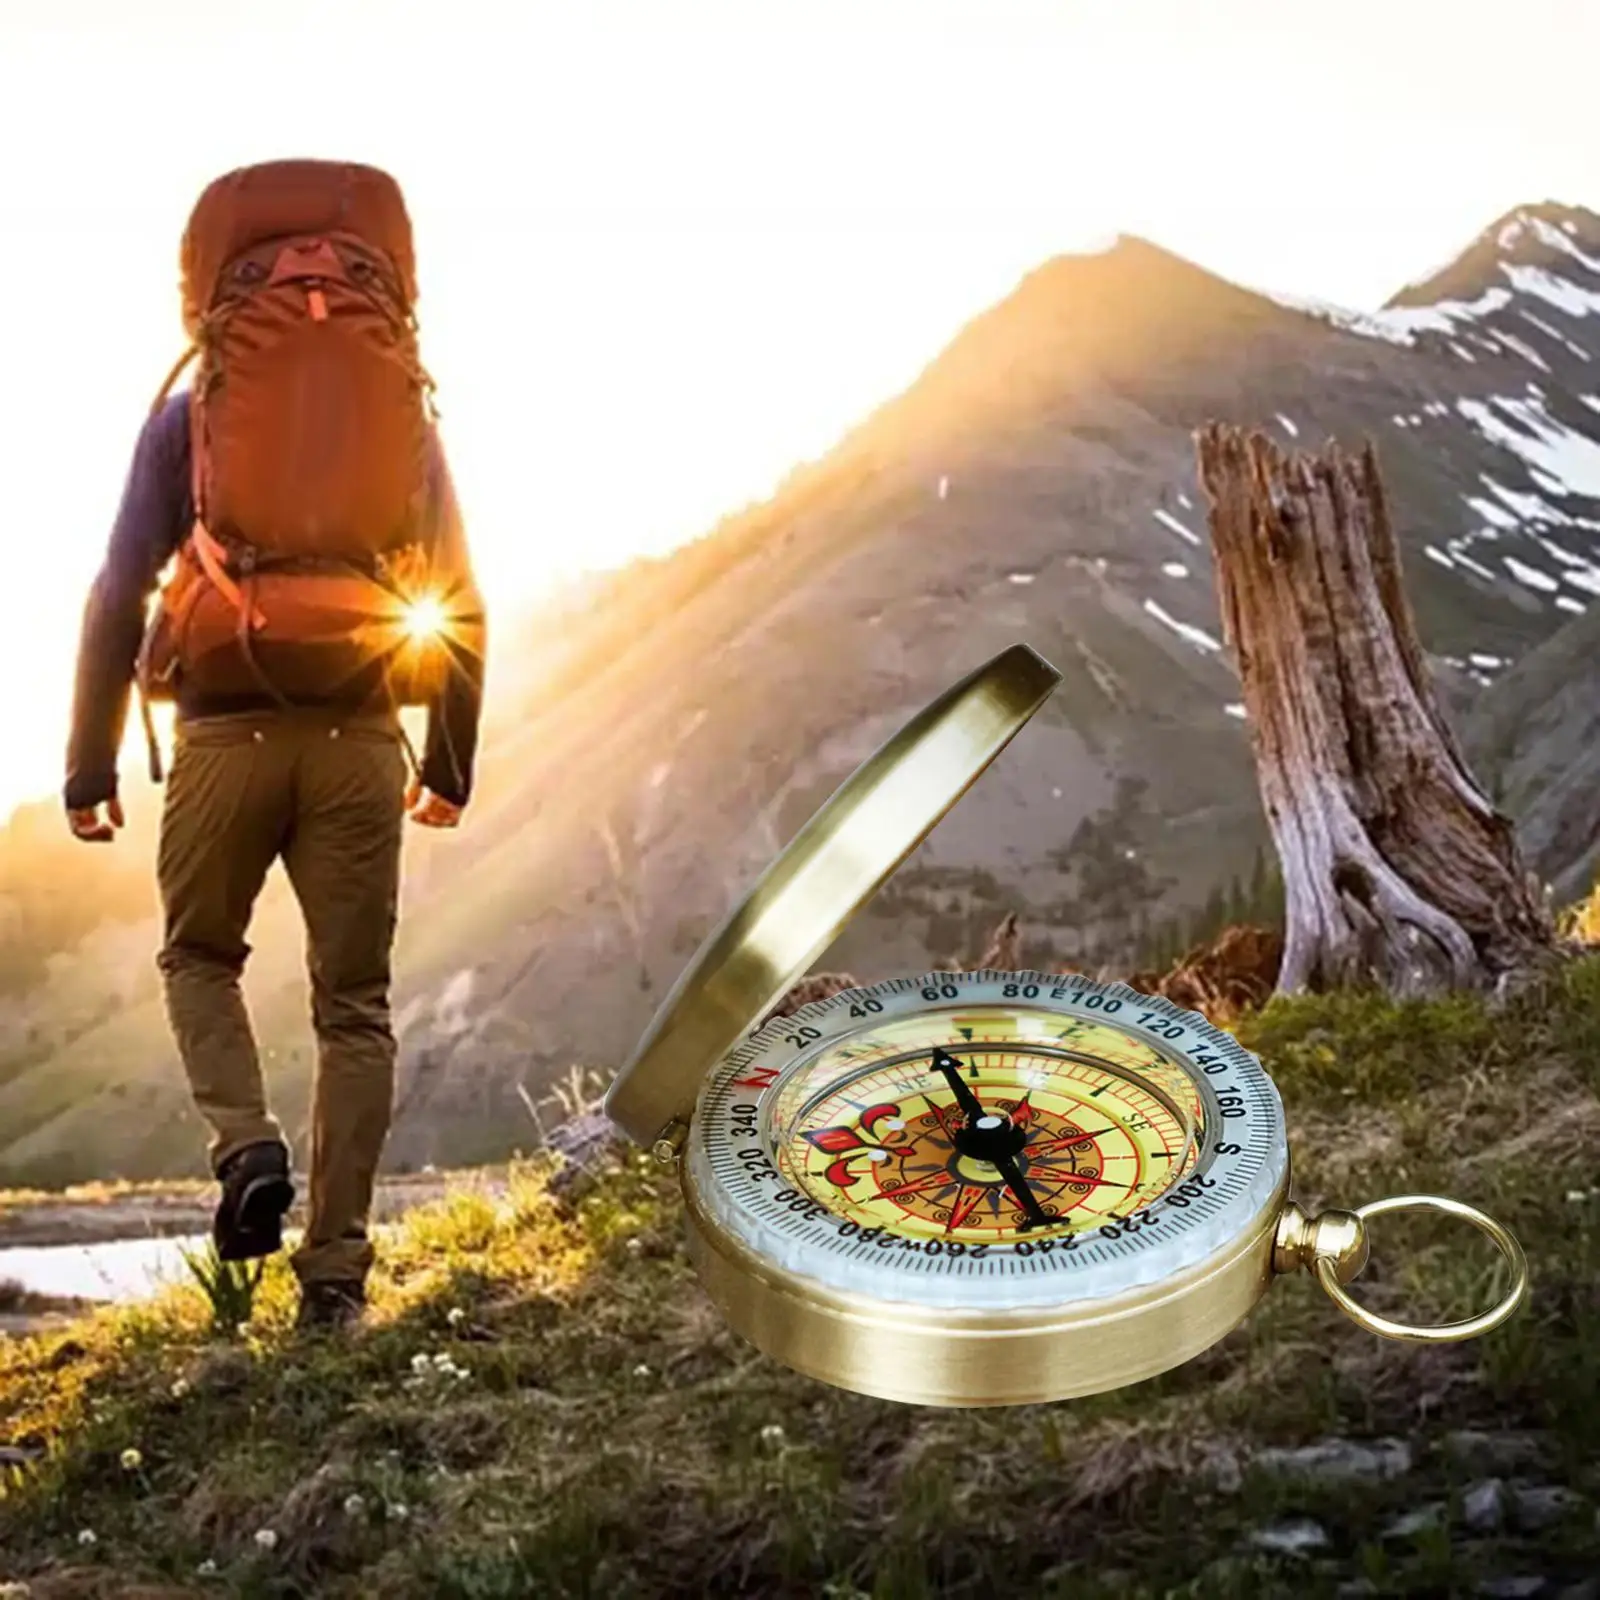 Camping Survival Compass Old Fashioned Glow in The Dark Compact Classic Pocket Style Compass for Navigation Climbing Hiking